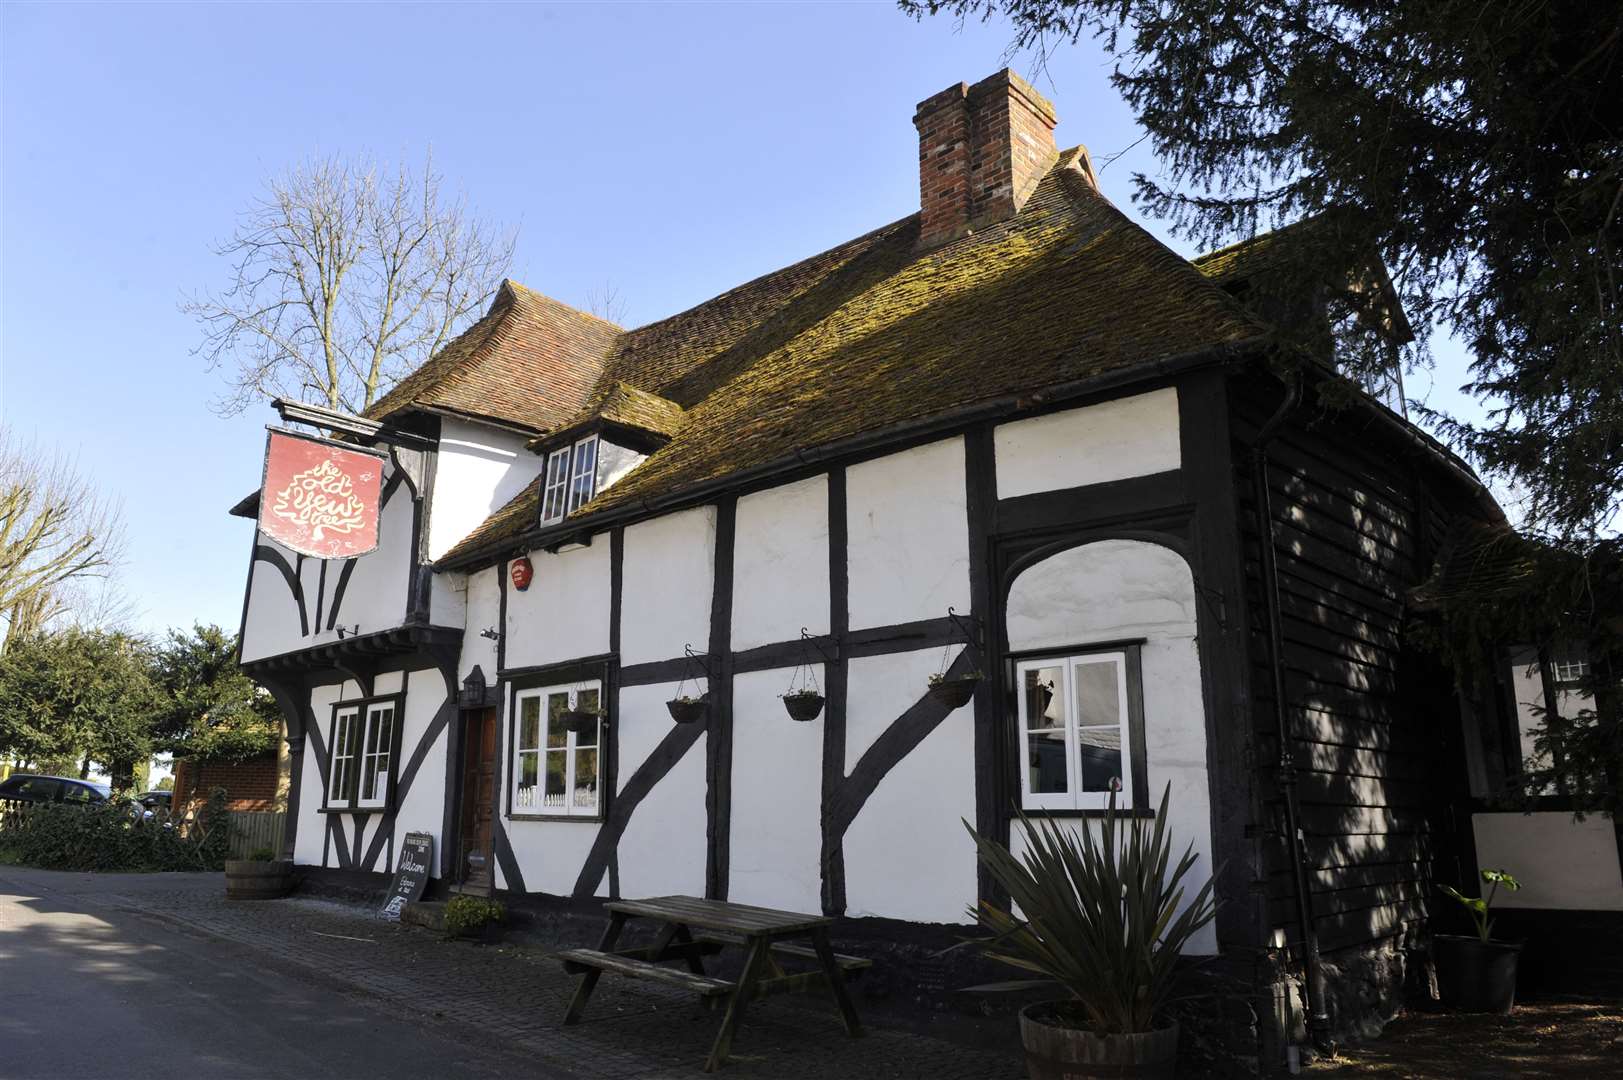 Ye Olde Yew Tree Inn, in Westbere near Canterbury, is the oldest pub in Kent - or at least the oldest building to still be home to a pub